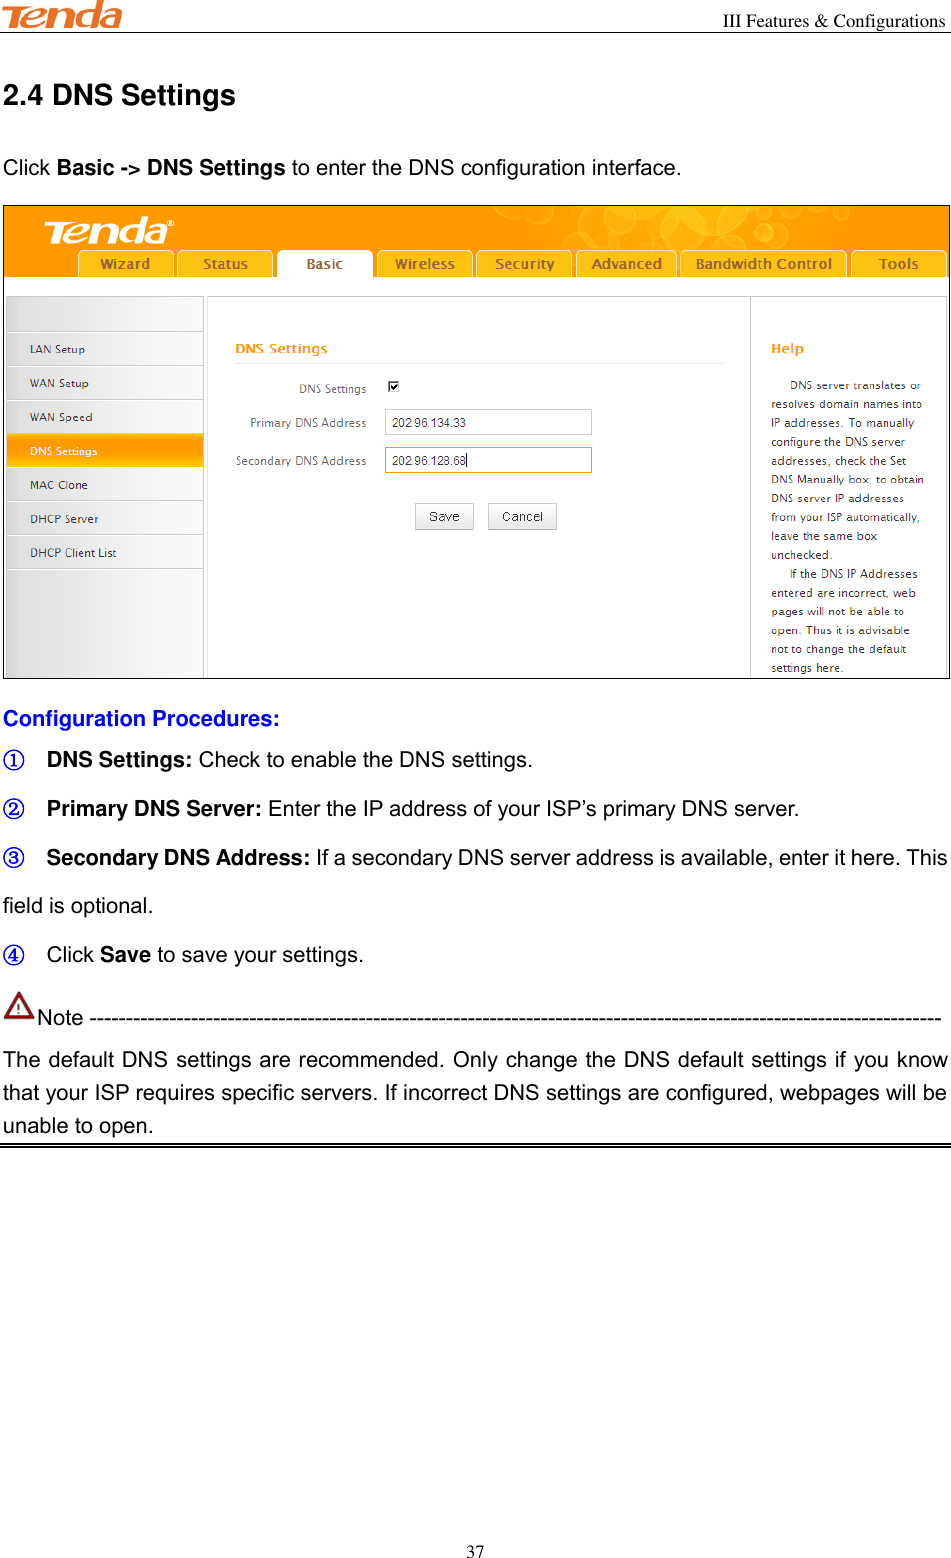                                                        III Features &amp; Configurations           37 2.4 DNS Settings Click Basic -&gt; DNS Settings to enter the DNS configuration interface.  Configuration Procedures: ① DNS Settings: Check to enable the DNS settings. ② Primary DNS Server: Enter the IP address of your ISP’s primary DNS server. ③ Secondary DNS Address: If a secondary DNS server address is available, enter it here. This field is optional. ④ Click Save to save your settings. Note --------------------------------------------------------------------------------------------------------------------- The default DNS settings are recommended. Only change the DNS default settings if you know that your ISP requires specific servers. If incorrect DNS settings are configured, webpages will be unable to open. 